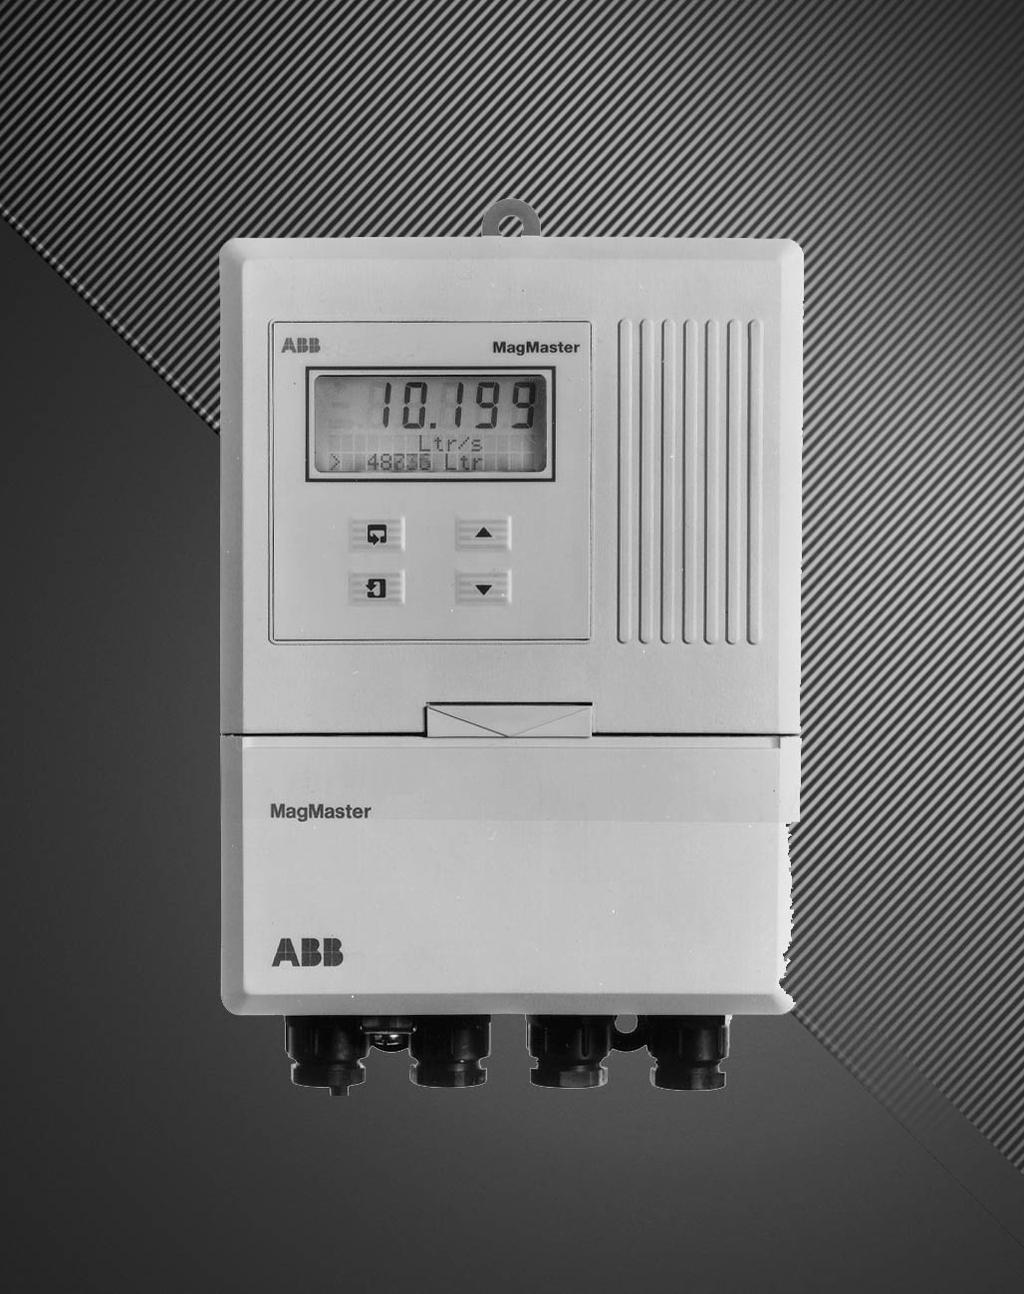 Advanced switching power supply 95 to 240V ac and 11 to 40V dc Test mode and Self diagnostics provides powerful start up tool.